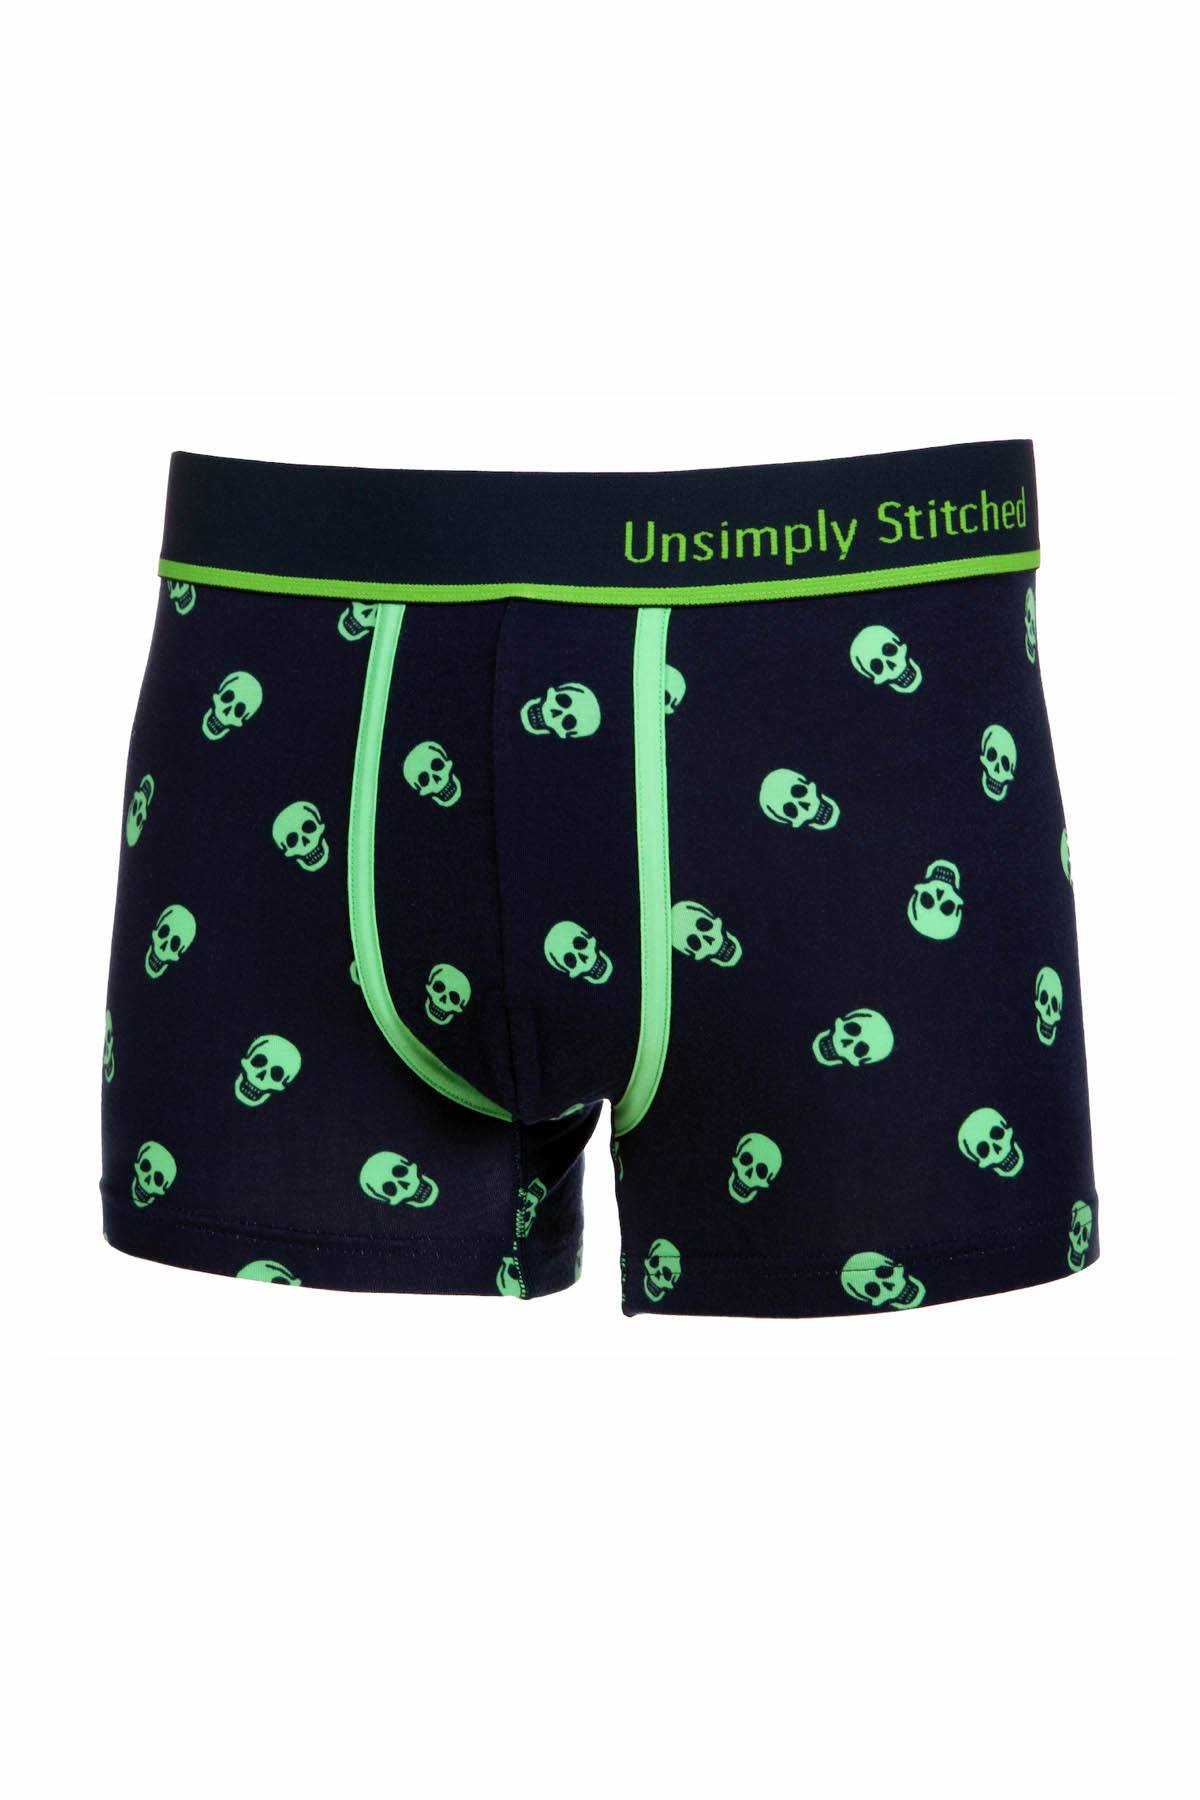 Unsimply Stitched Lime Green Skull Trunk